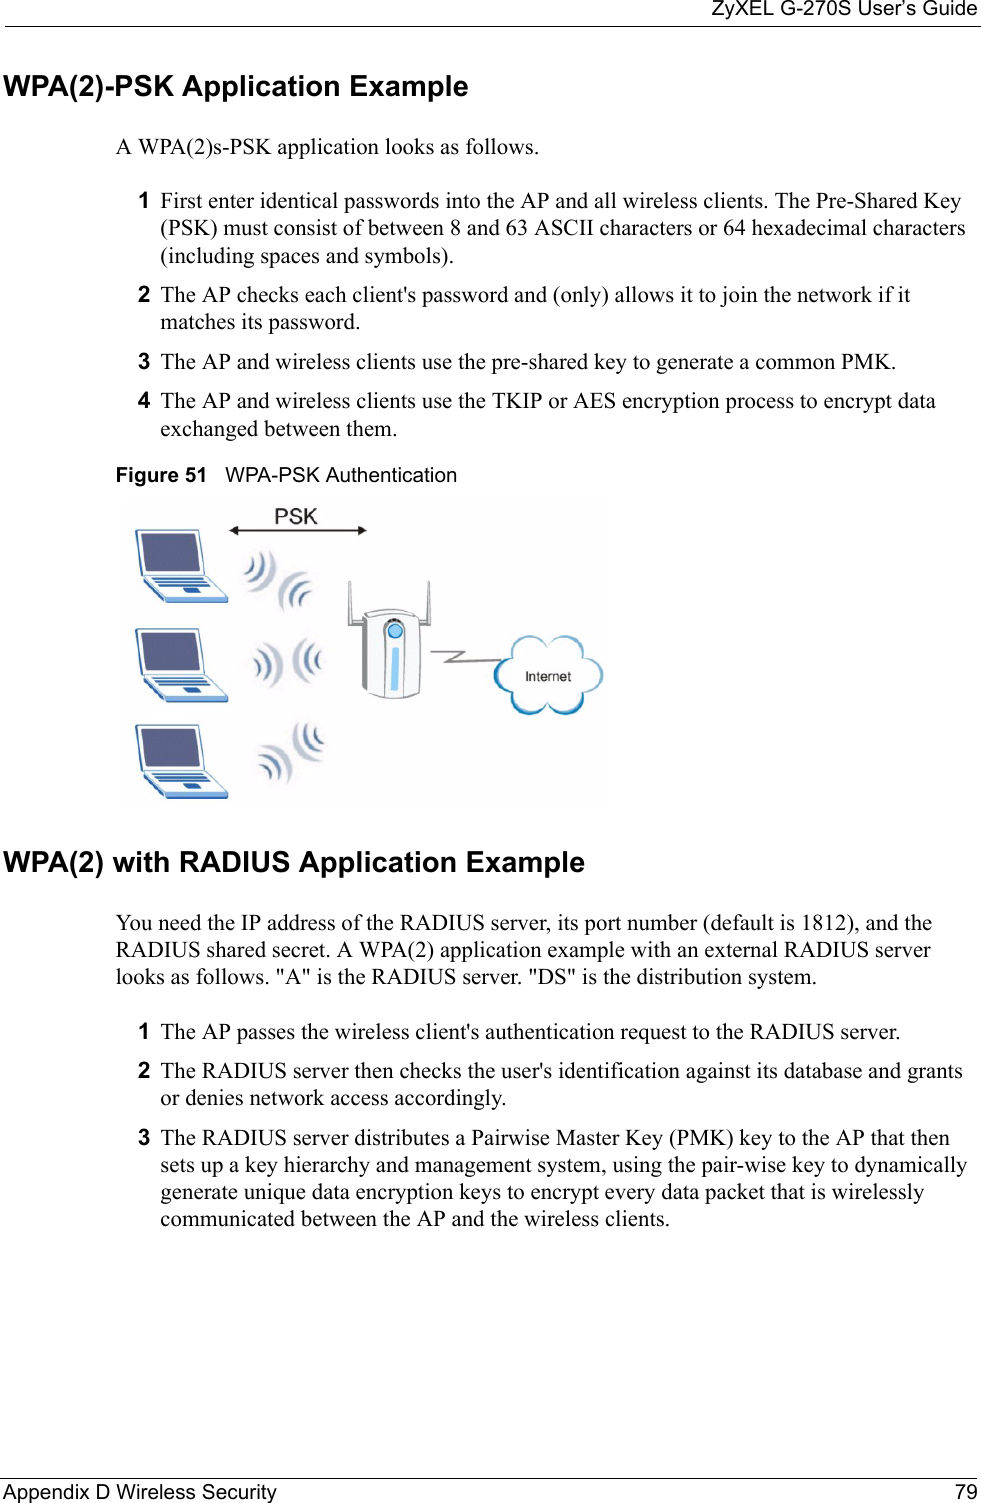 ZyXEL G-270S User’s GuideAppendix D Wireless Security 79WPA(2)-PSK Application ExampleA WPA(2)s-PSK application looks as follows.1First enter identical passwords into the AP and all wireless clients. The Pre-Shared Key (PSK) must consist of between 8 and 63 ASCII characters or 64 hexadecimal characters (including spaces and symbols).2The AP checks each client&apos;s password and (only) allows it to join the network if it matches its password.3The AP and wireless clients use the pre-shared key to generate a common PMK.4The AP and wireless clients use the TKIP or AES encryption process to encrypt data exchanged between them.Figure 51   WPA-PSK AuthenticationWPA(2) with RADIUS Application ExampleYou need the IP address of the RADIUS server, its port number (default is 1812), and the RADIUS shared secret. A WPA(2) application example with an external RADIUS server looks as follows. &quot;A&quot; is the RADIUS server. &quot;DS&quot; is the distribution system.1The AP passes the wireless client&apos;s authentication request to the RADIUS server.2The RADIUS server then checks the user&apos;s identification against its database and grants or denies network access accordingly.3The RADIUS server distributes a Pairwise Master Key (PMK) key to the AP that then sets up a key hierarchy and management system, using the pair-wise key to dynamically generate unique data encryption keys to encrypt every data packet that is wirelessly communicated between the AP and the wireless clients.